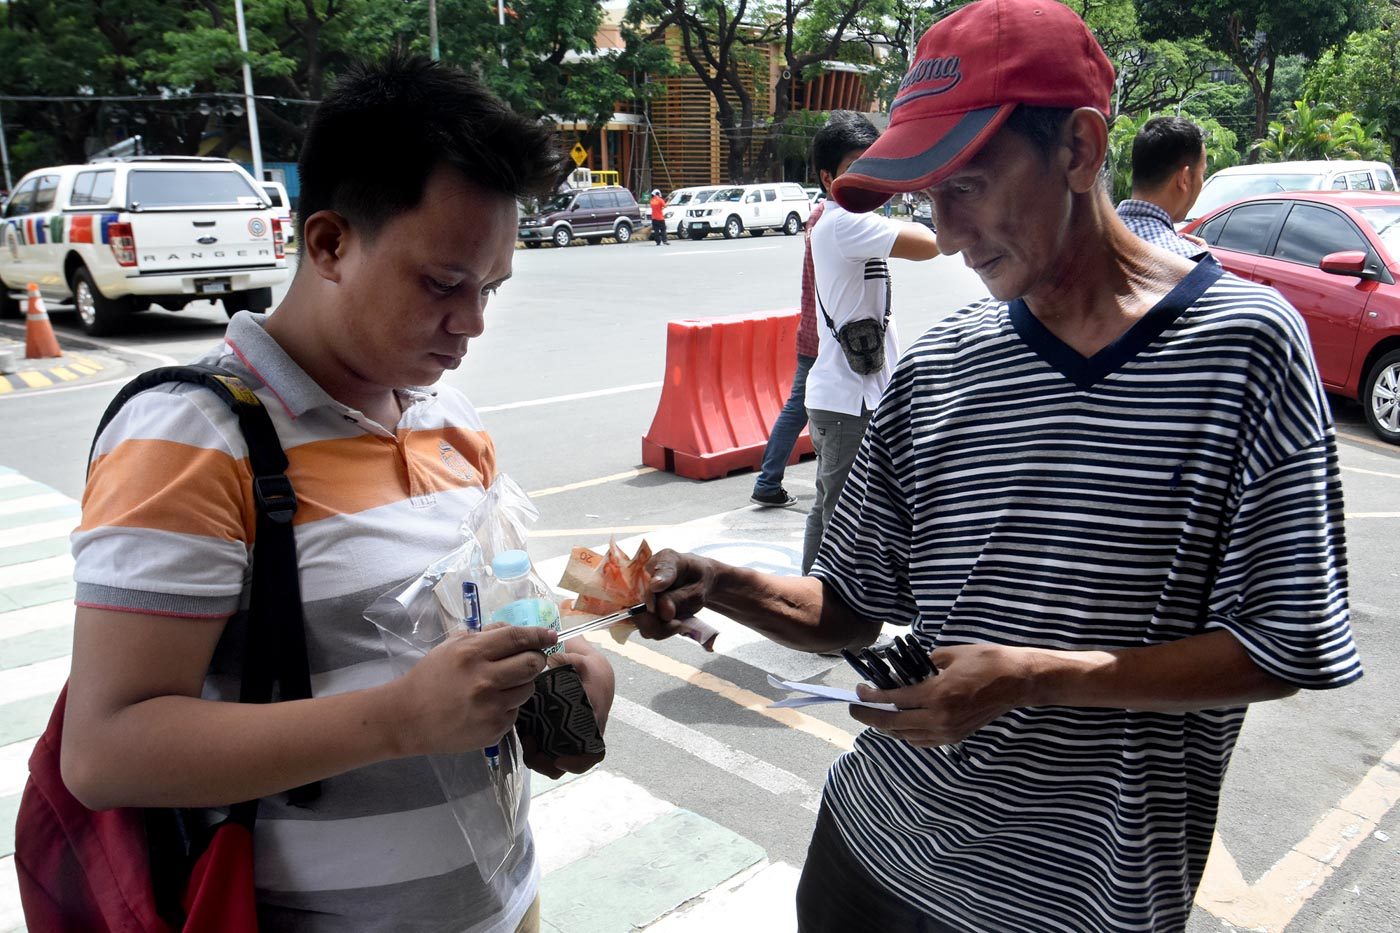 Mang Buboy, a pen vendor took the Job Fair as an opportunity to sell more pens. Photo by Angie de Silva/Rappler 